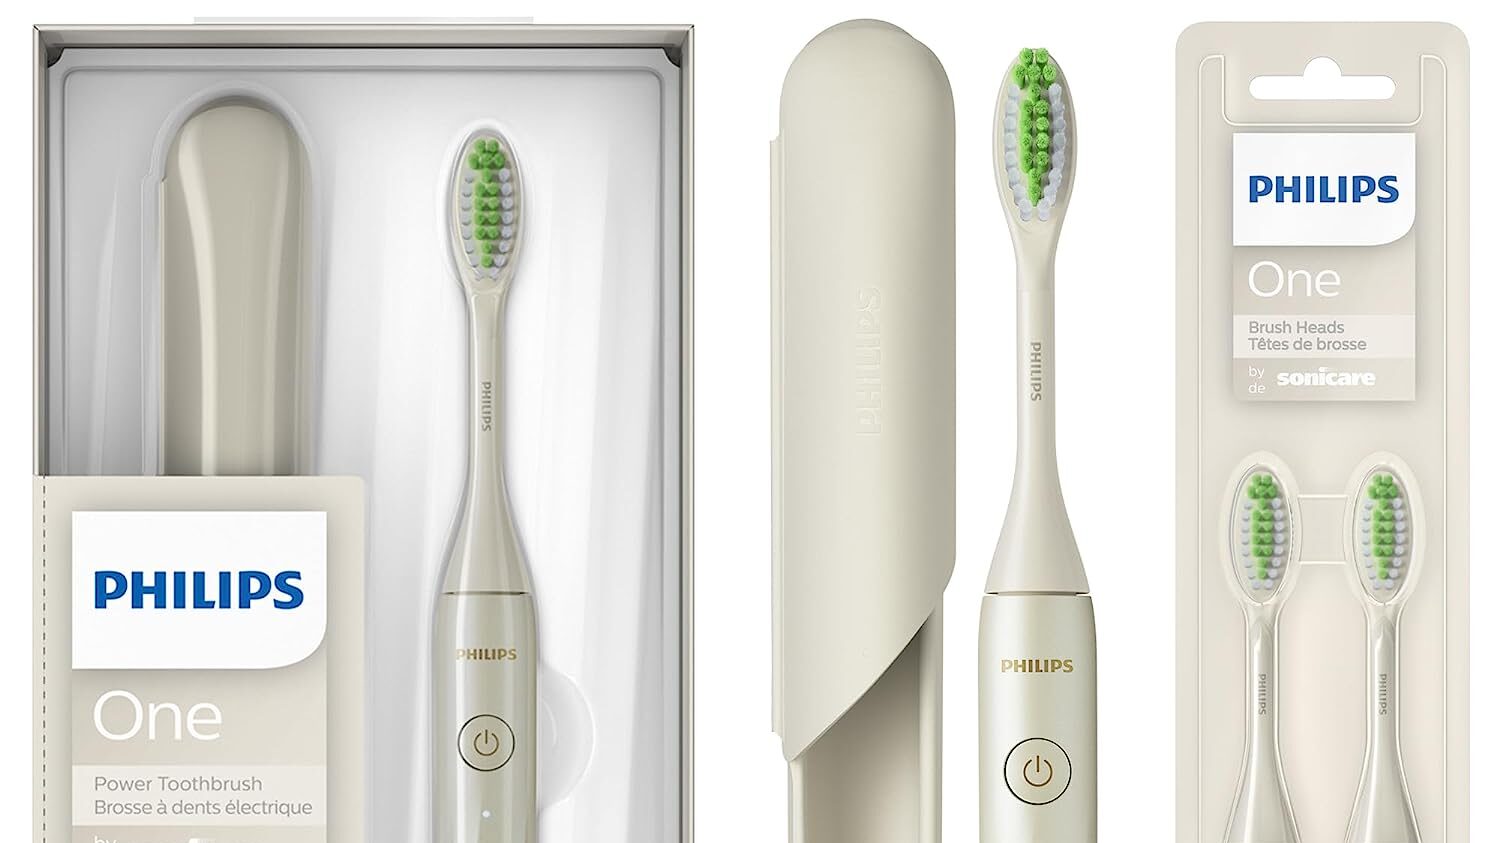 Philips Sonicare toothbrush on sale for Prime Day